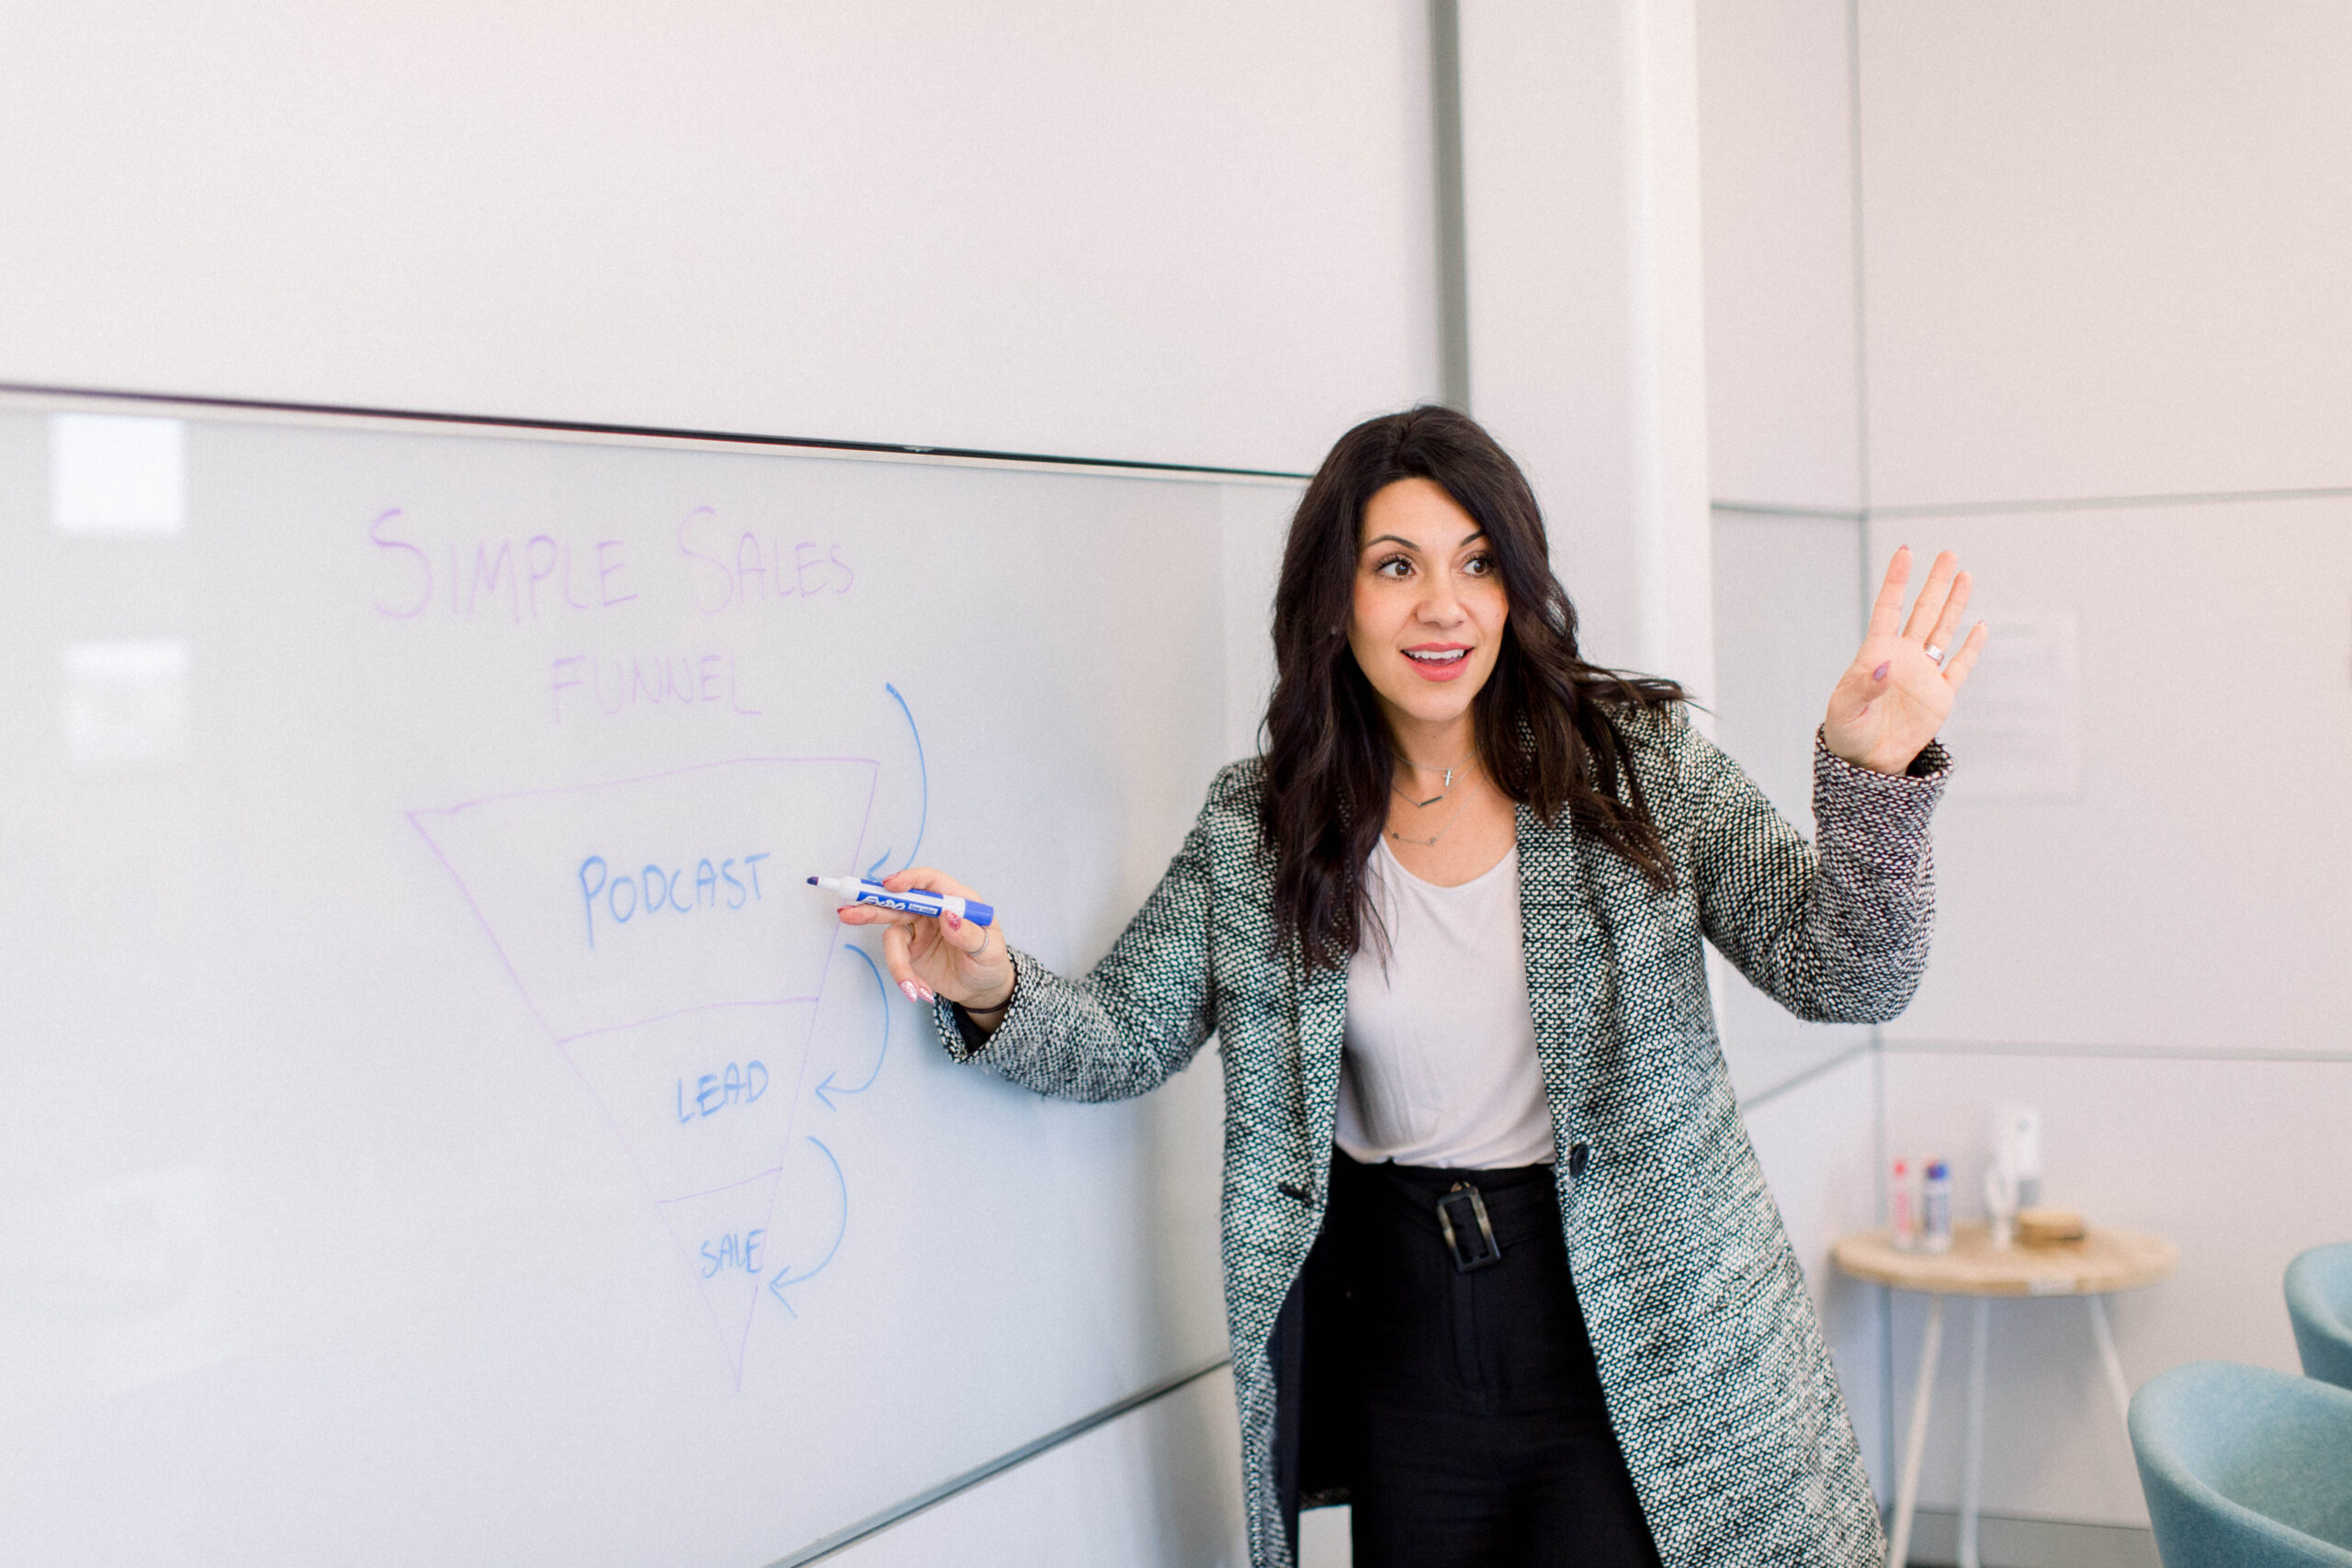 Brown haired woman teaching and instructing at a white board